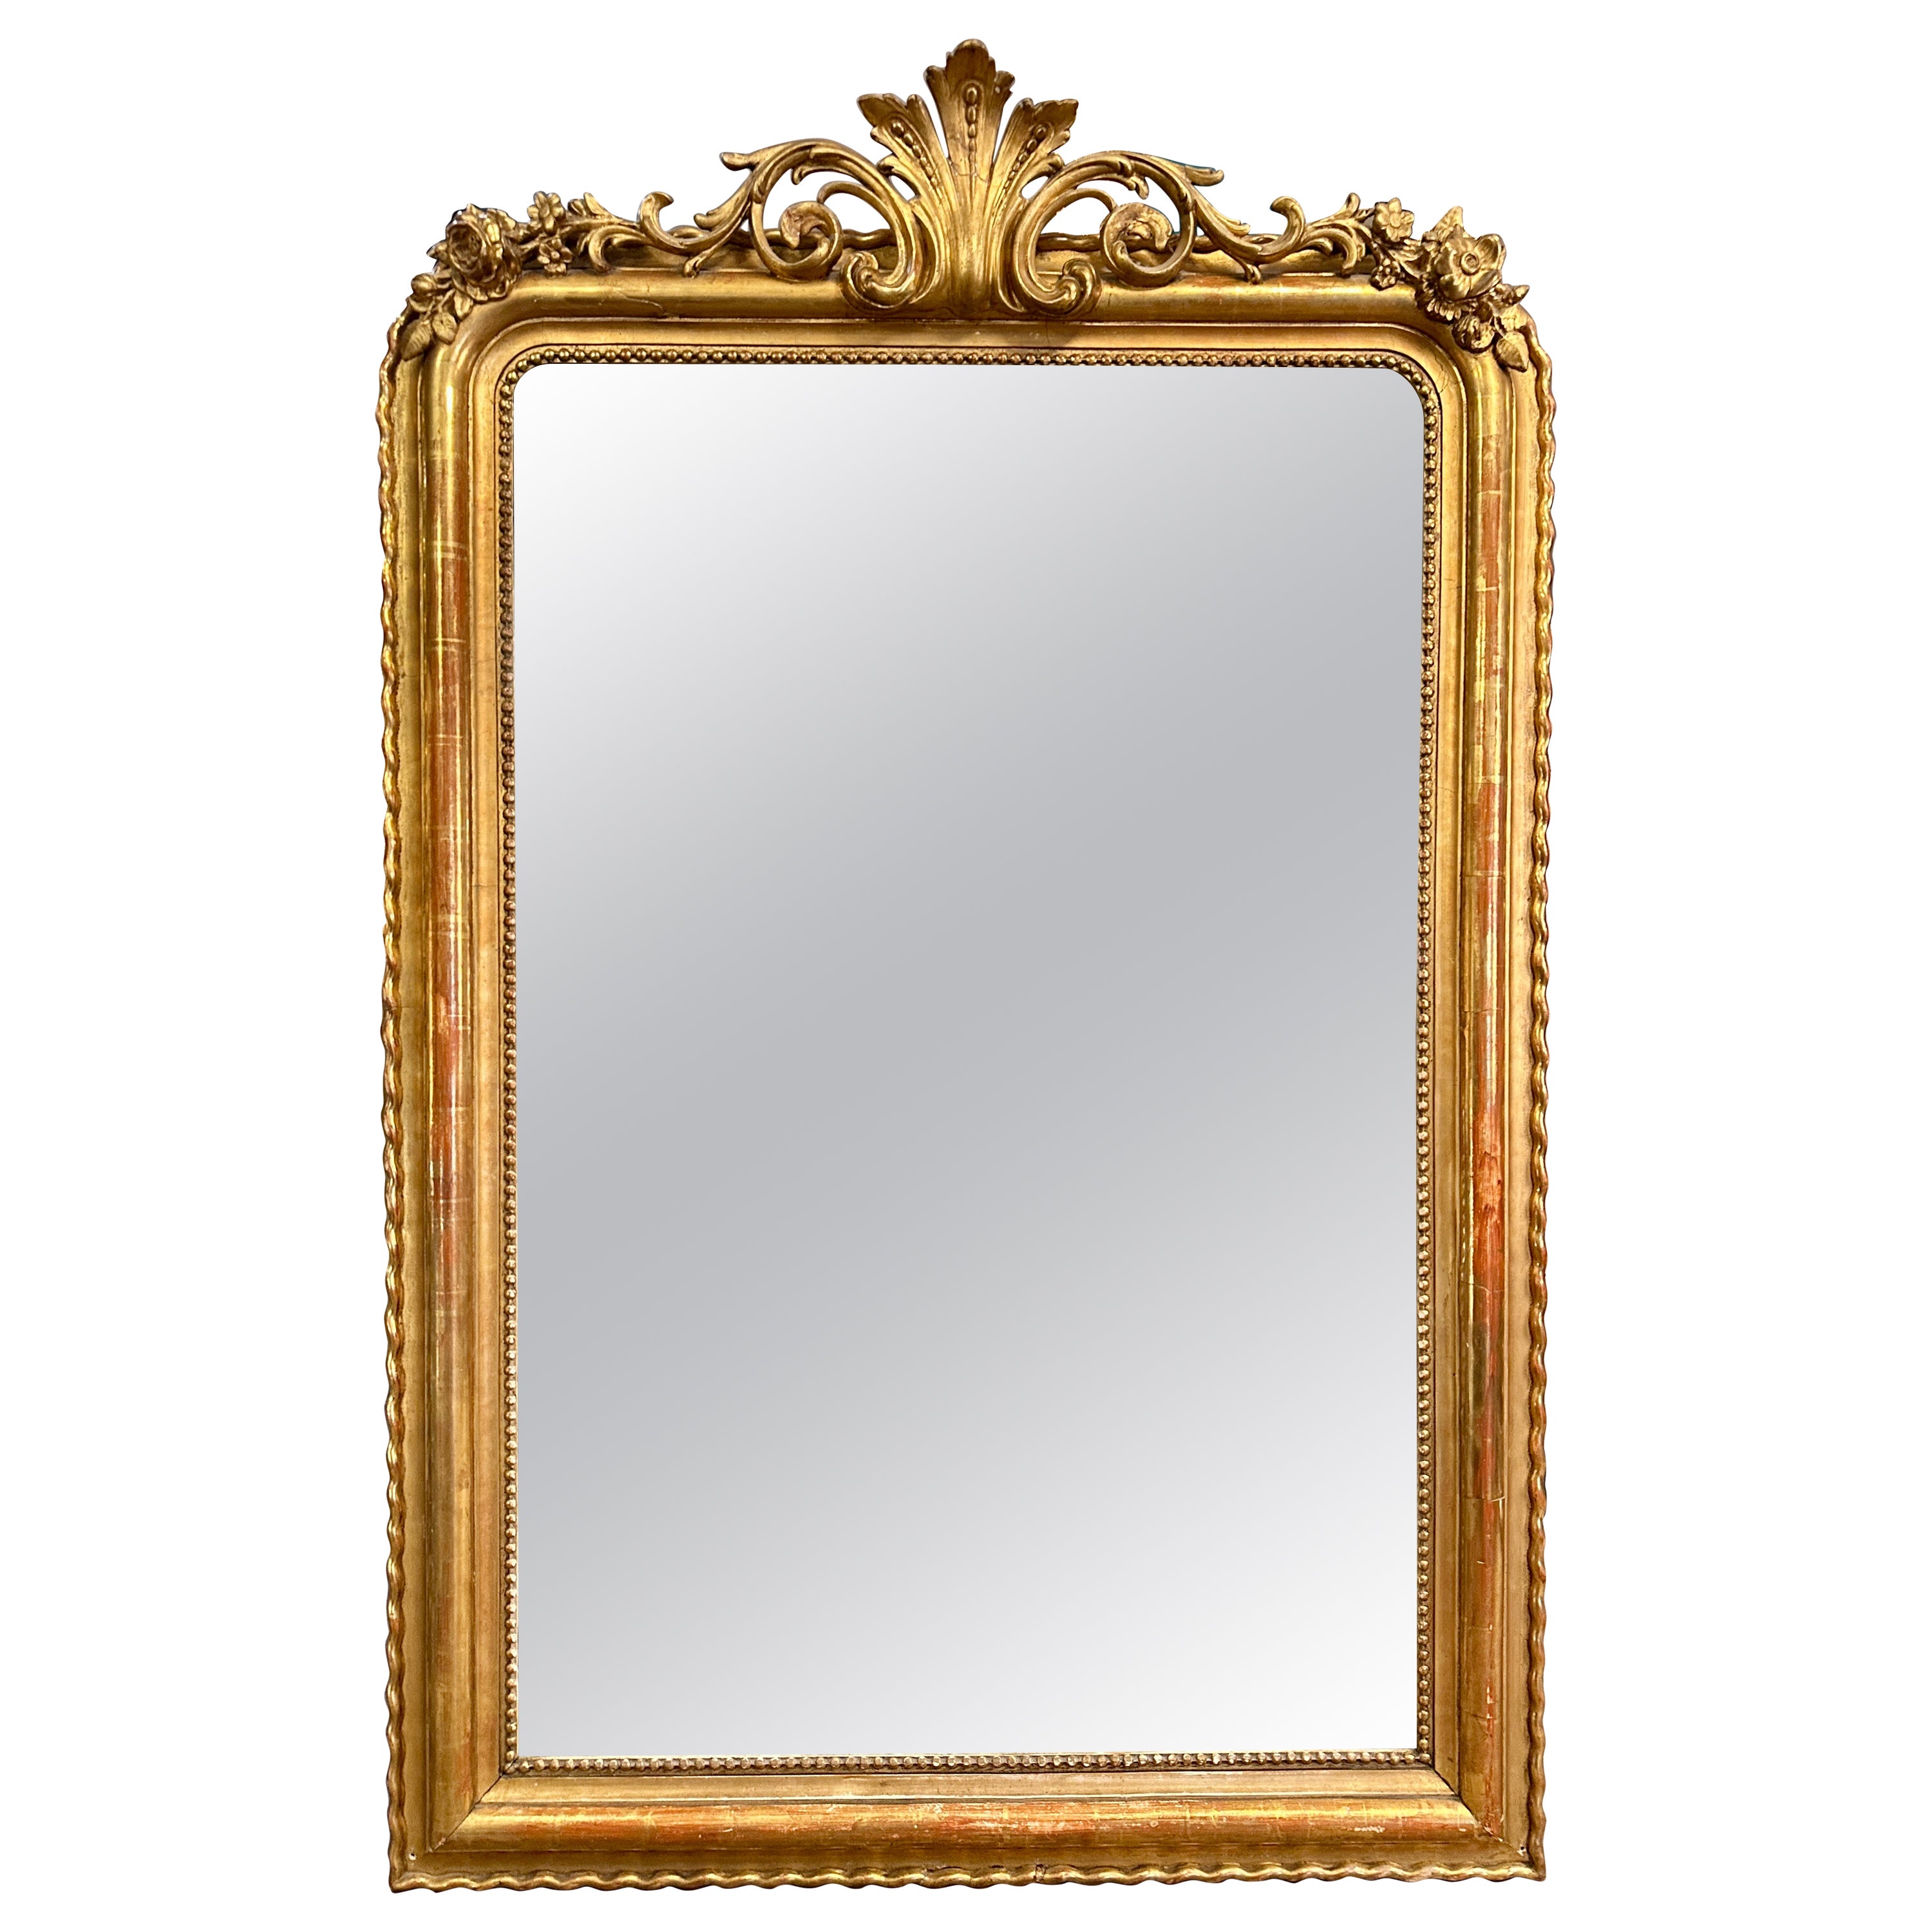 A Mid 19th Century French Gold Gilt Mirror 